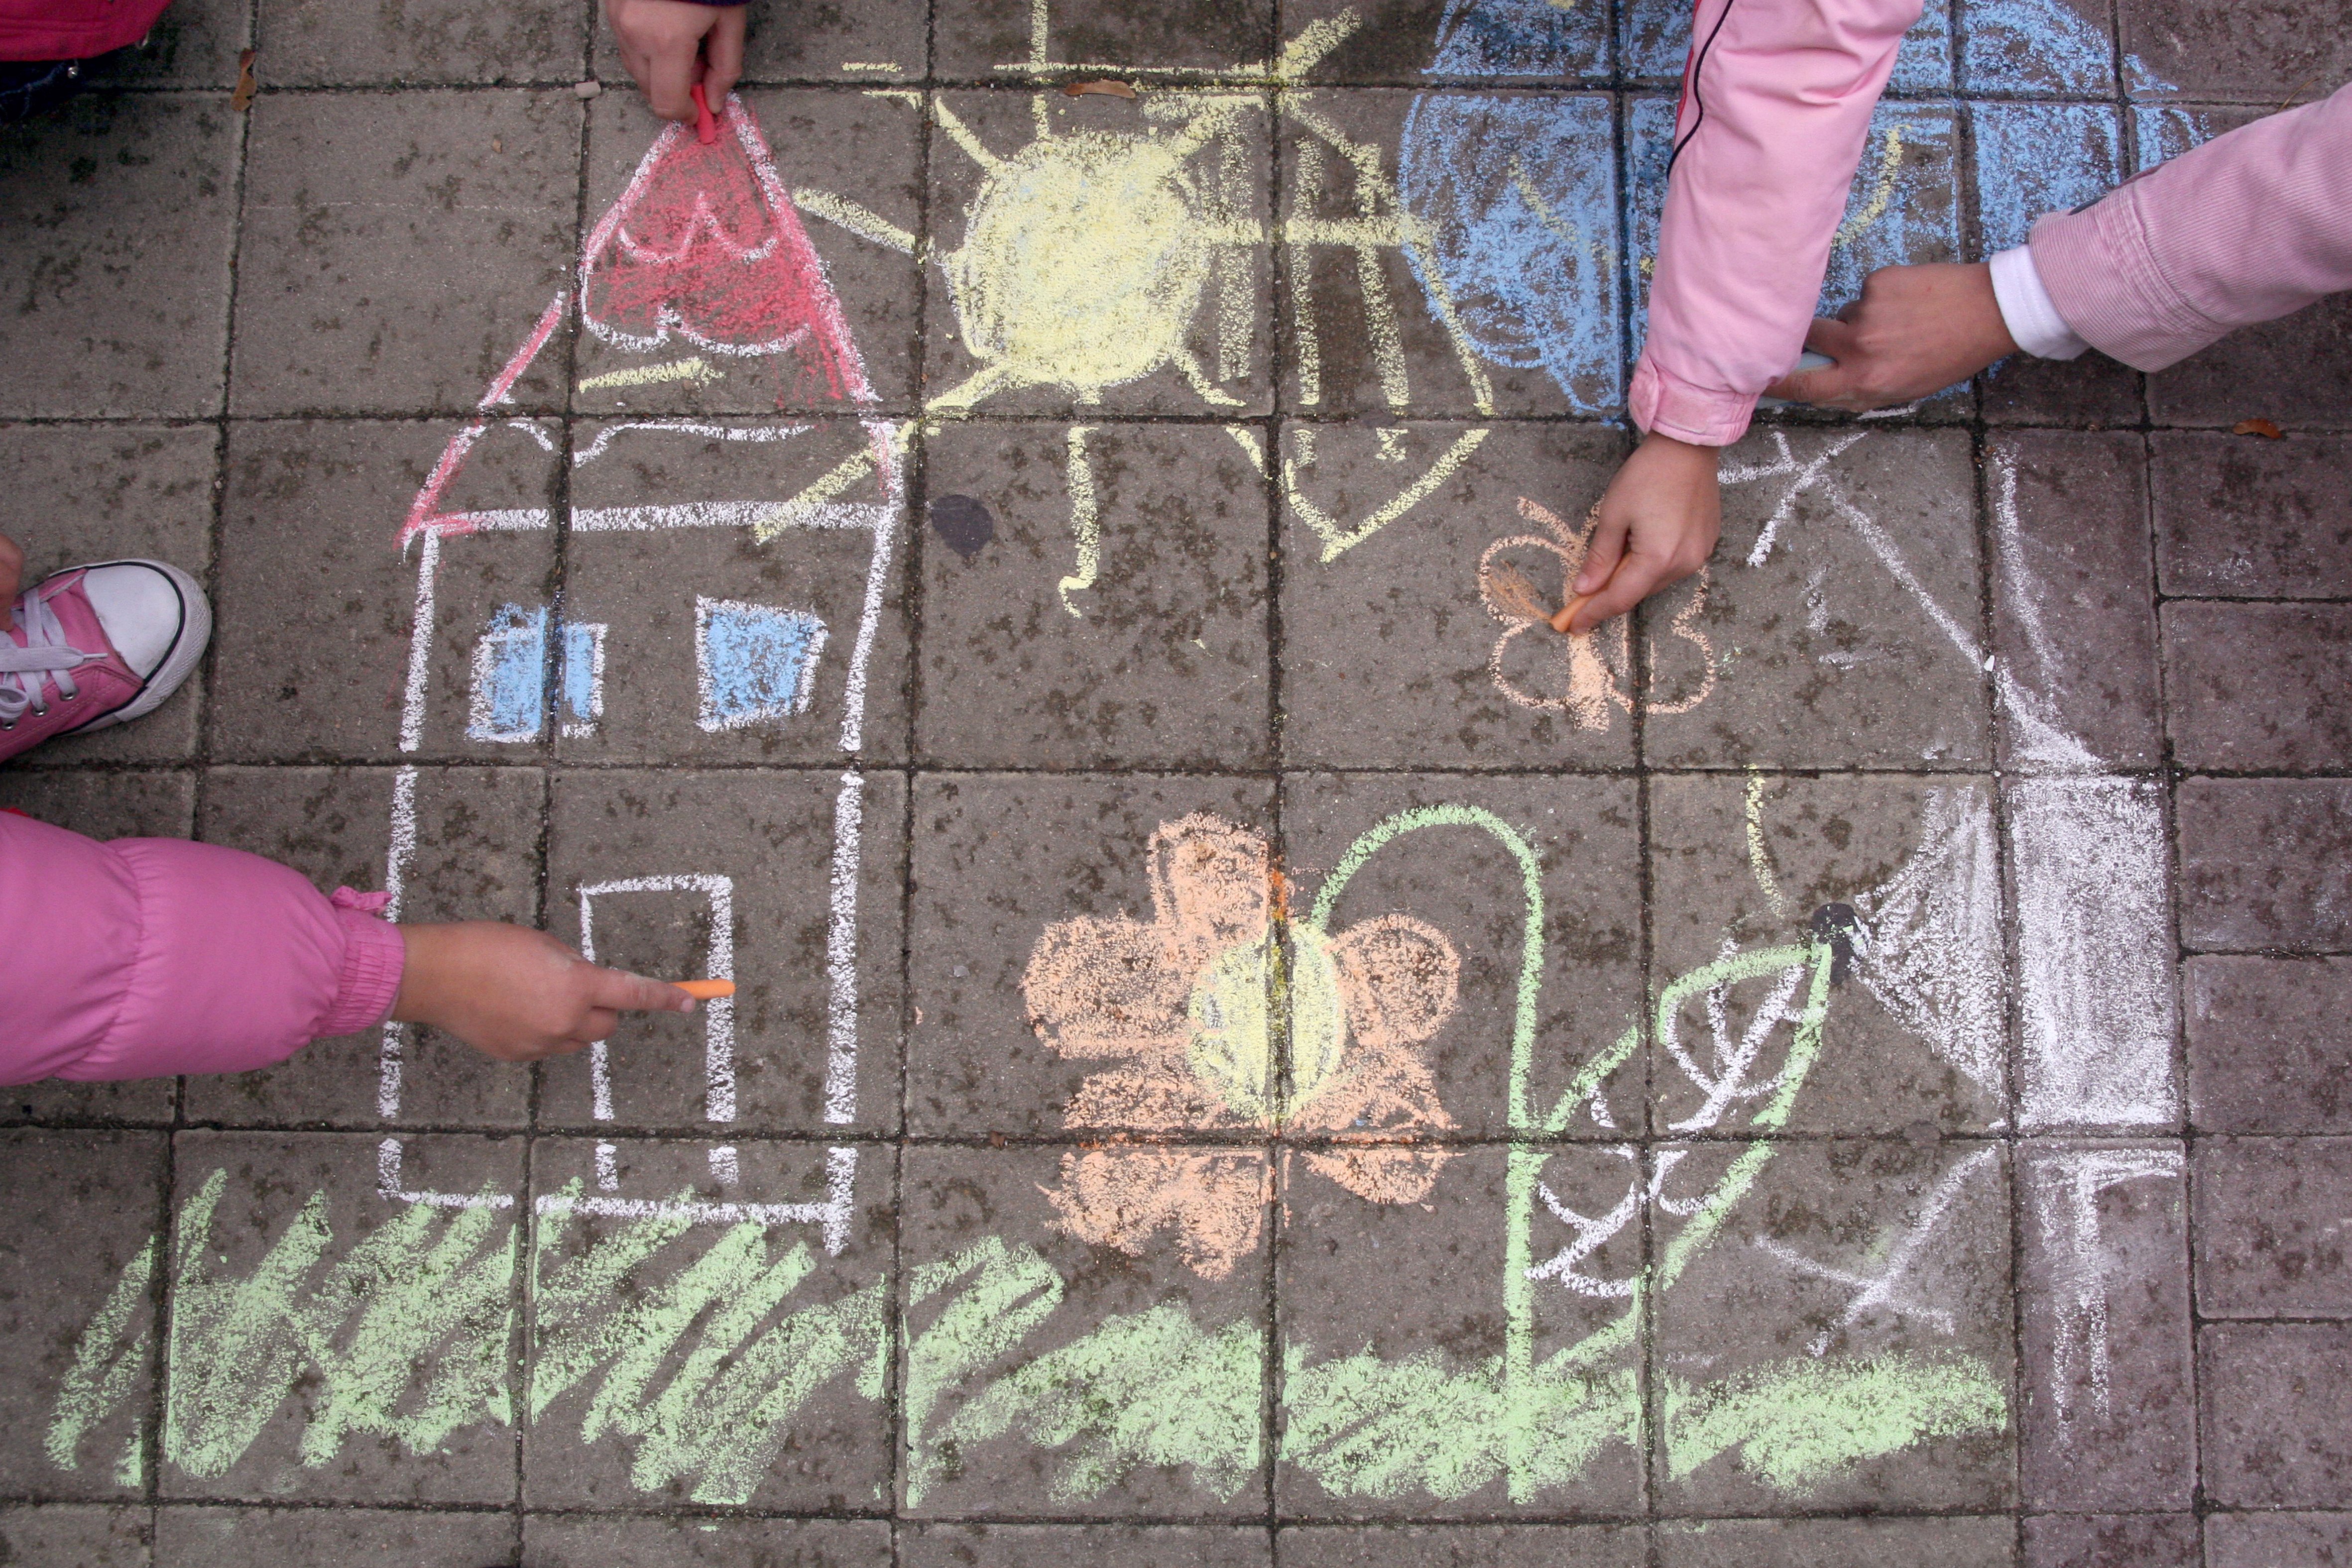 A drawing in chalk of a house and garden with children's arms reaching into to draw.